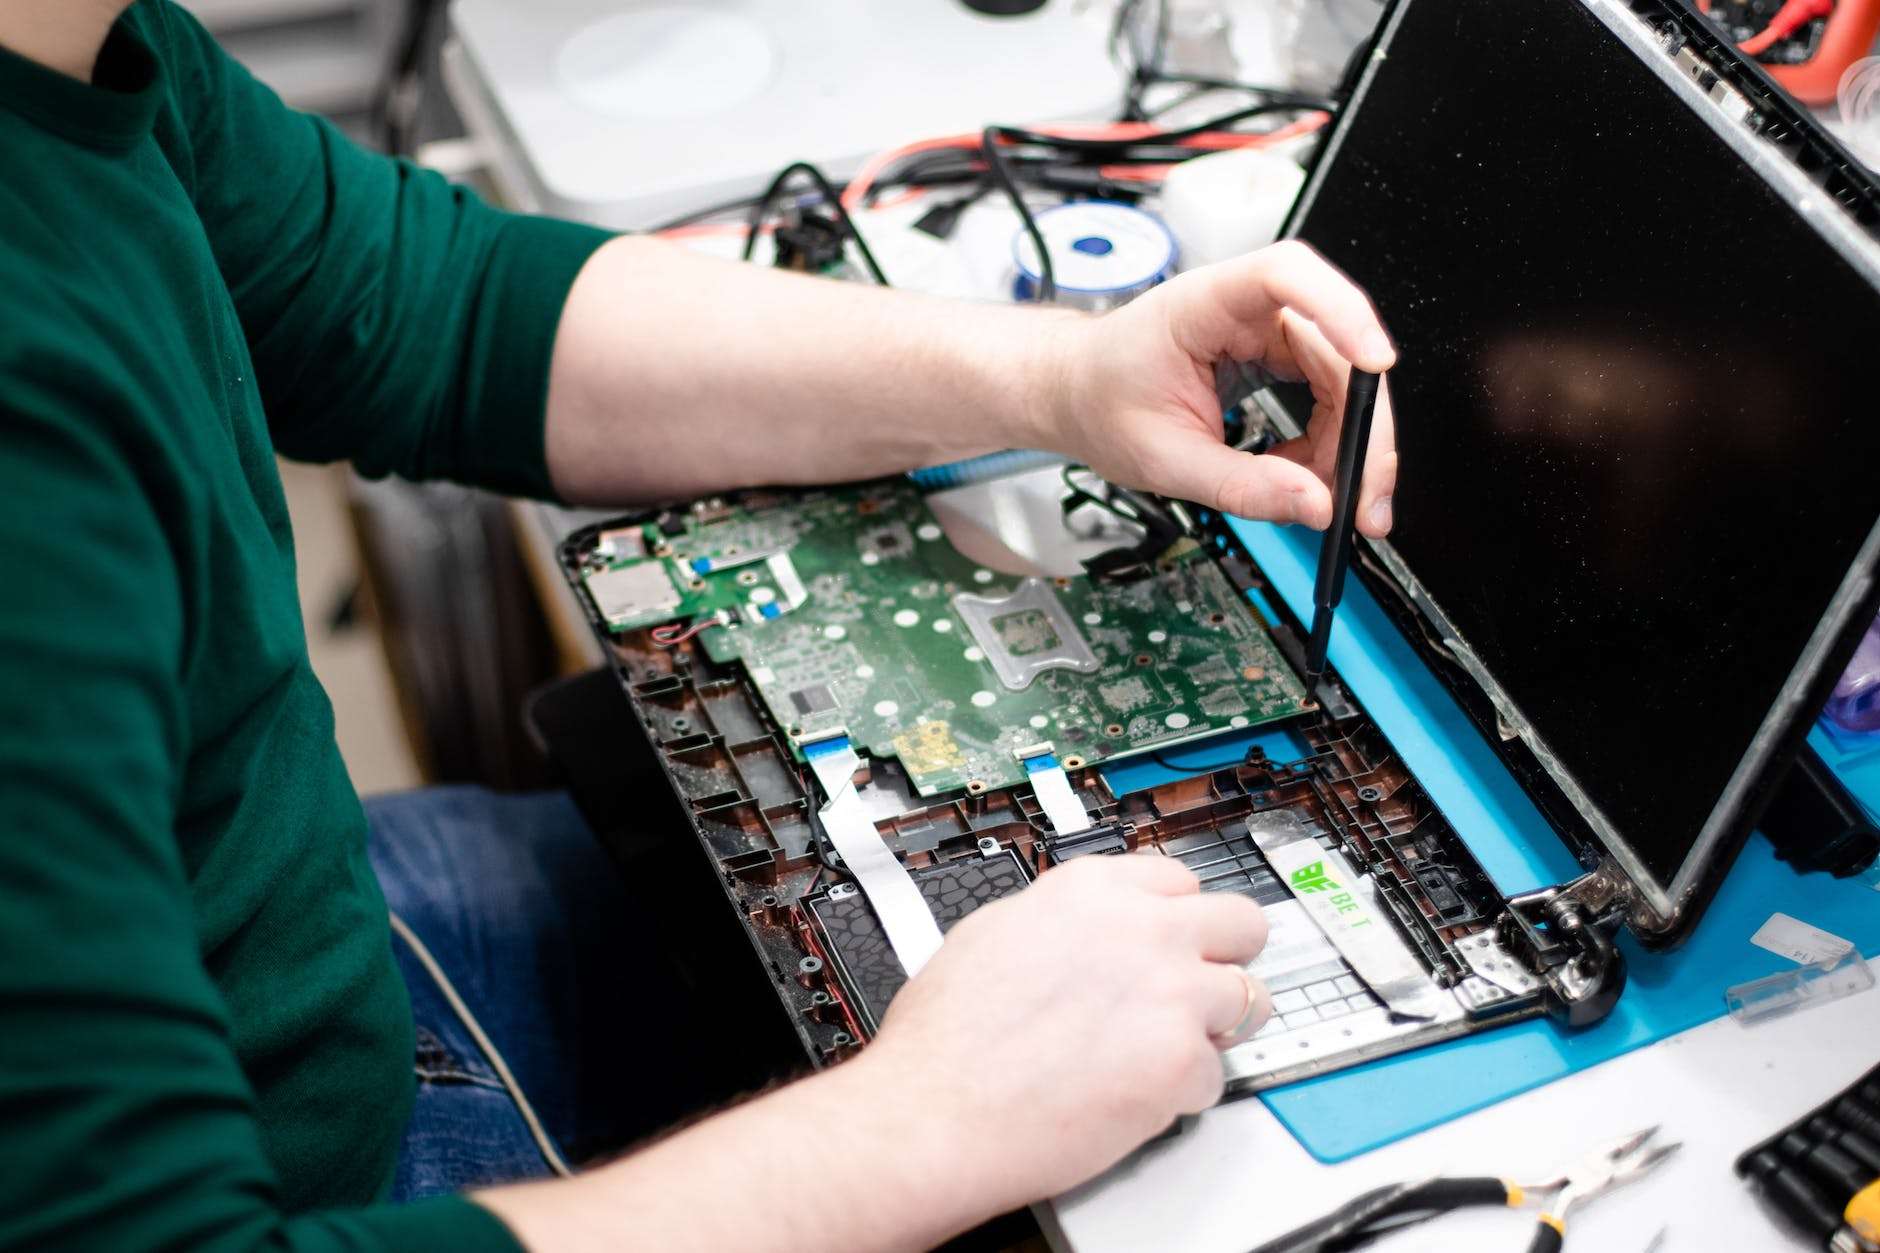 Laptop Repair: How to Get Your Laptop Back Up and Running